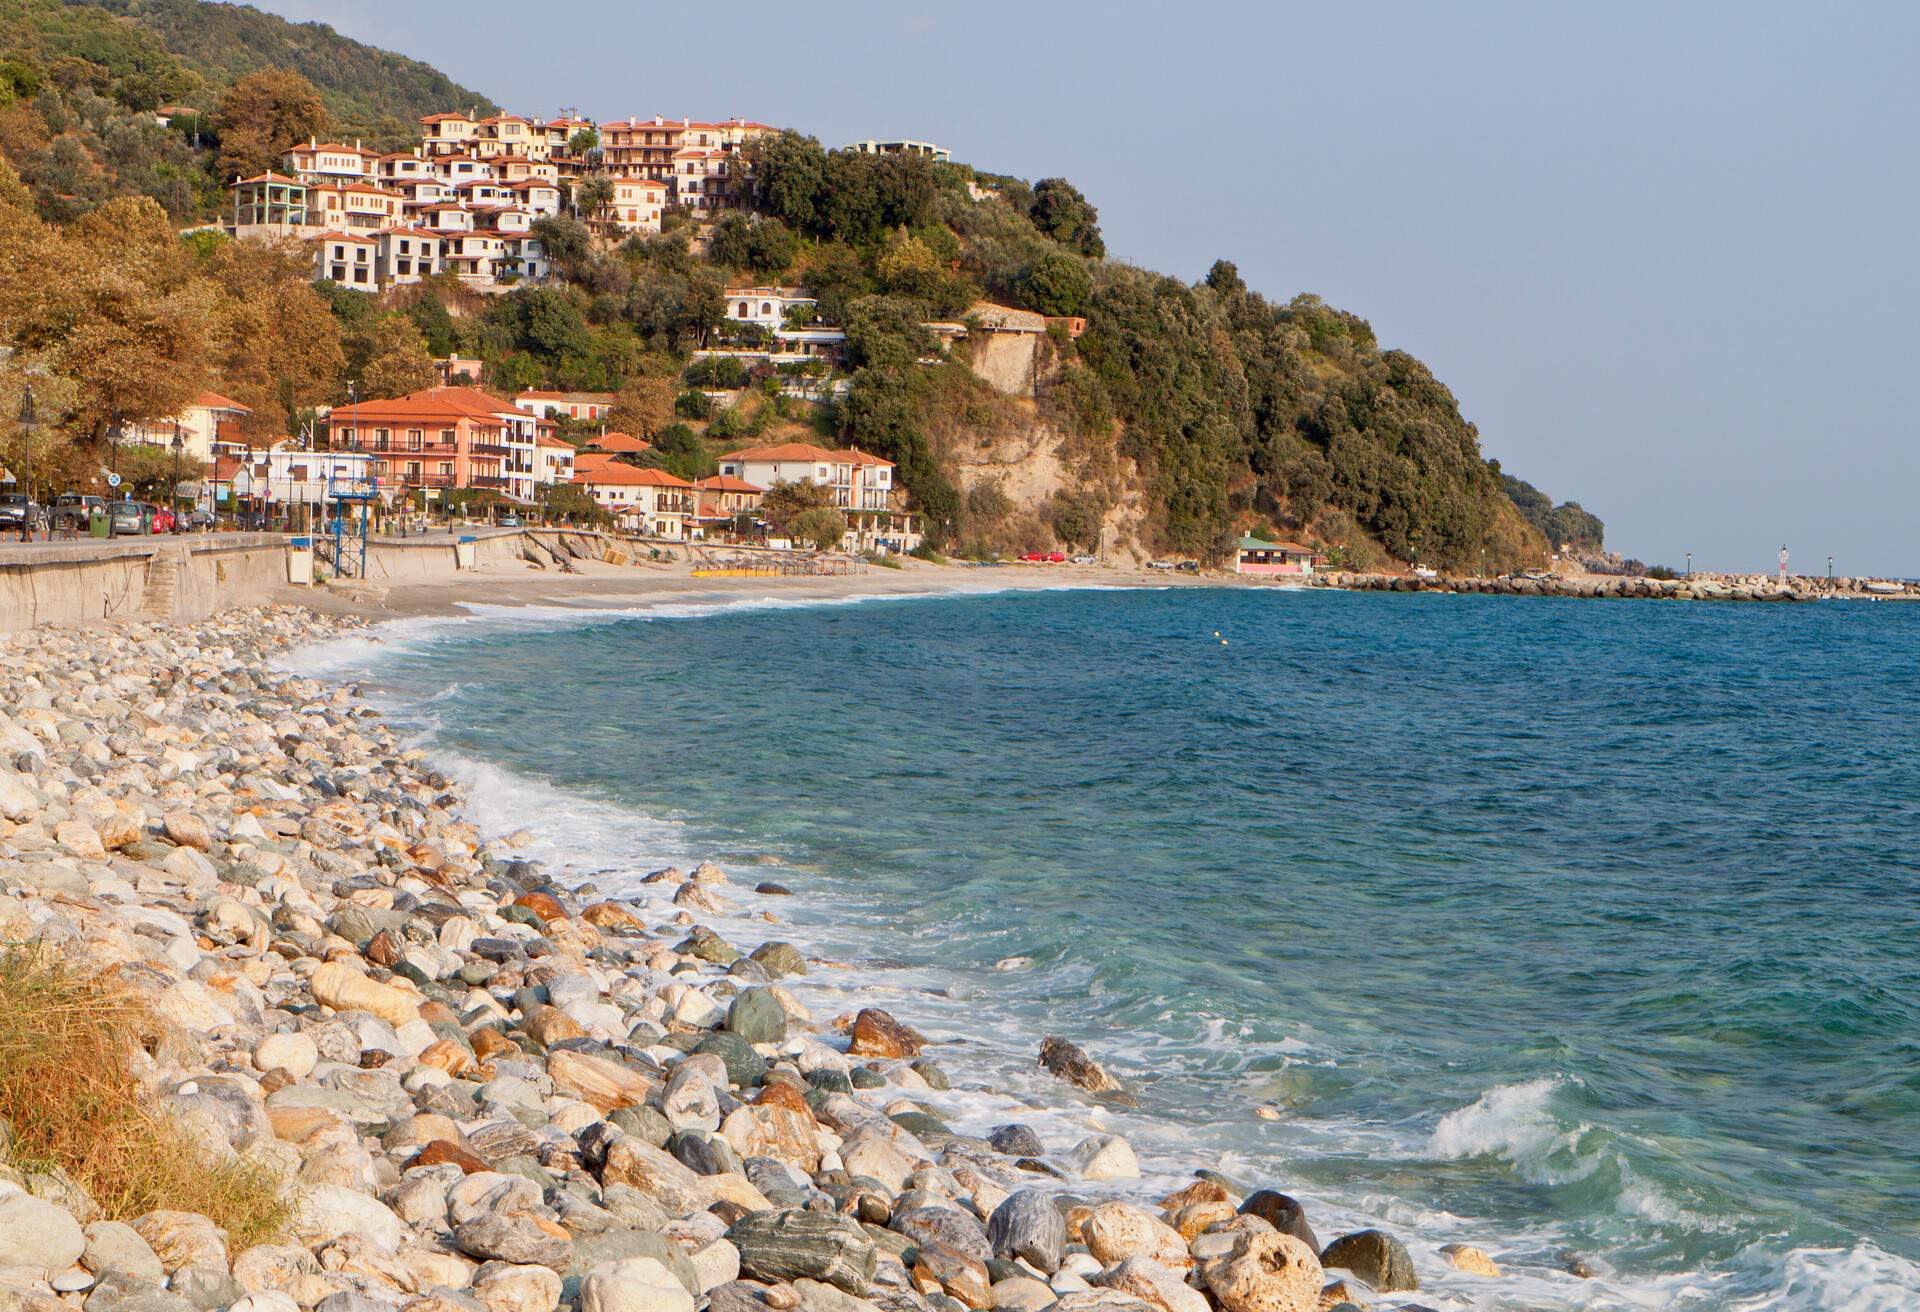 Agios Ioannis village and beach at Pelion in Greece